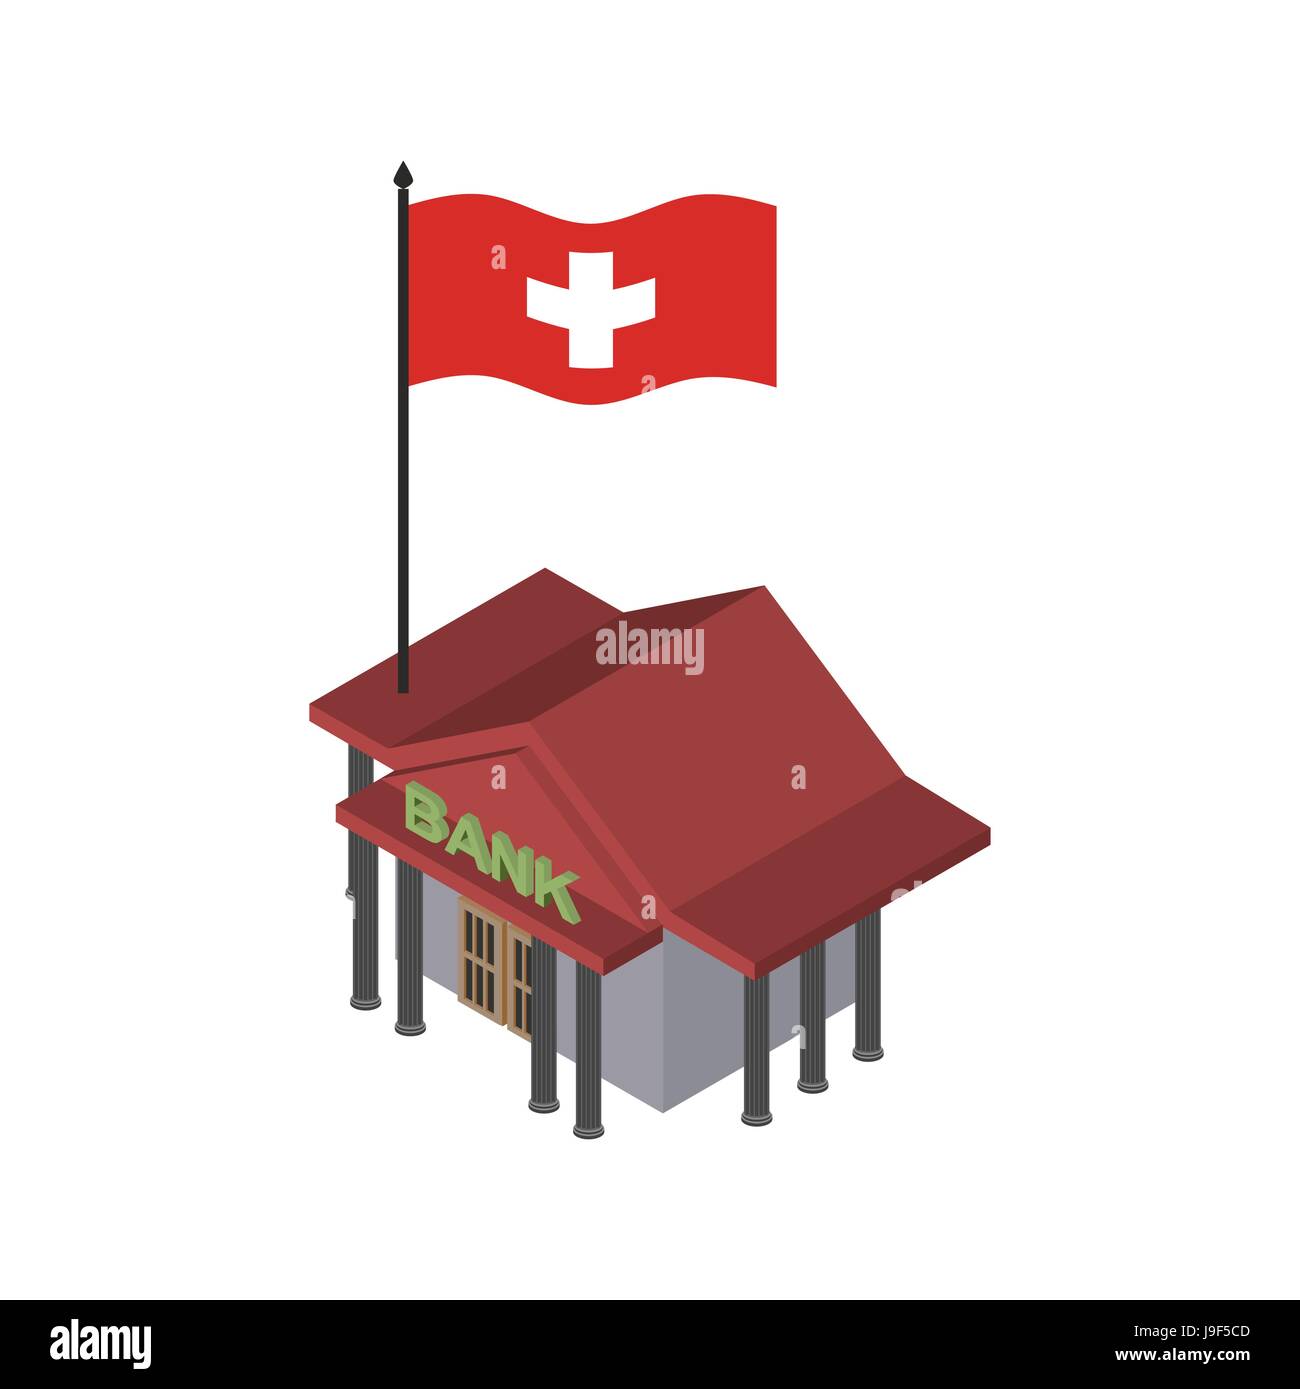 Swiss bank. Financial building and flag of Switzerland Stock Vector